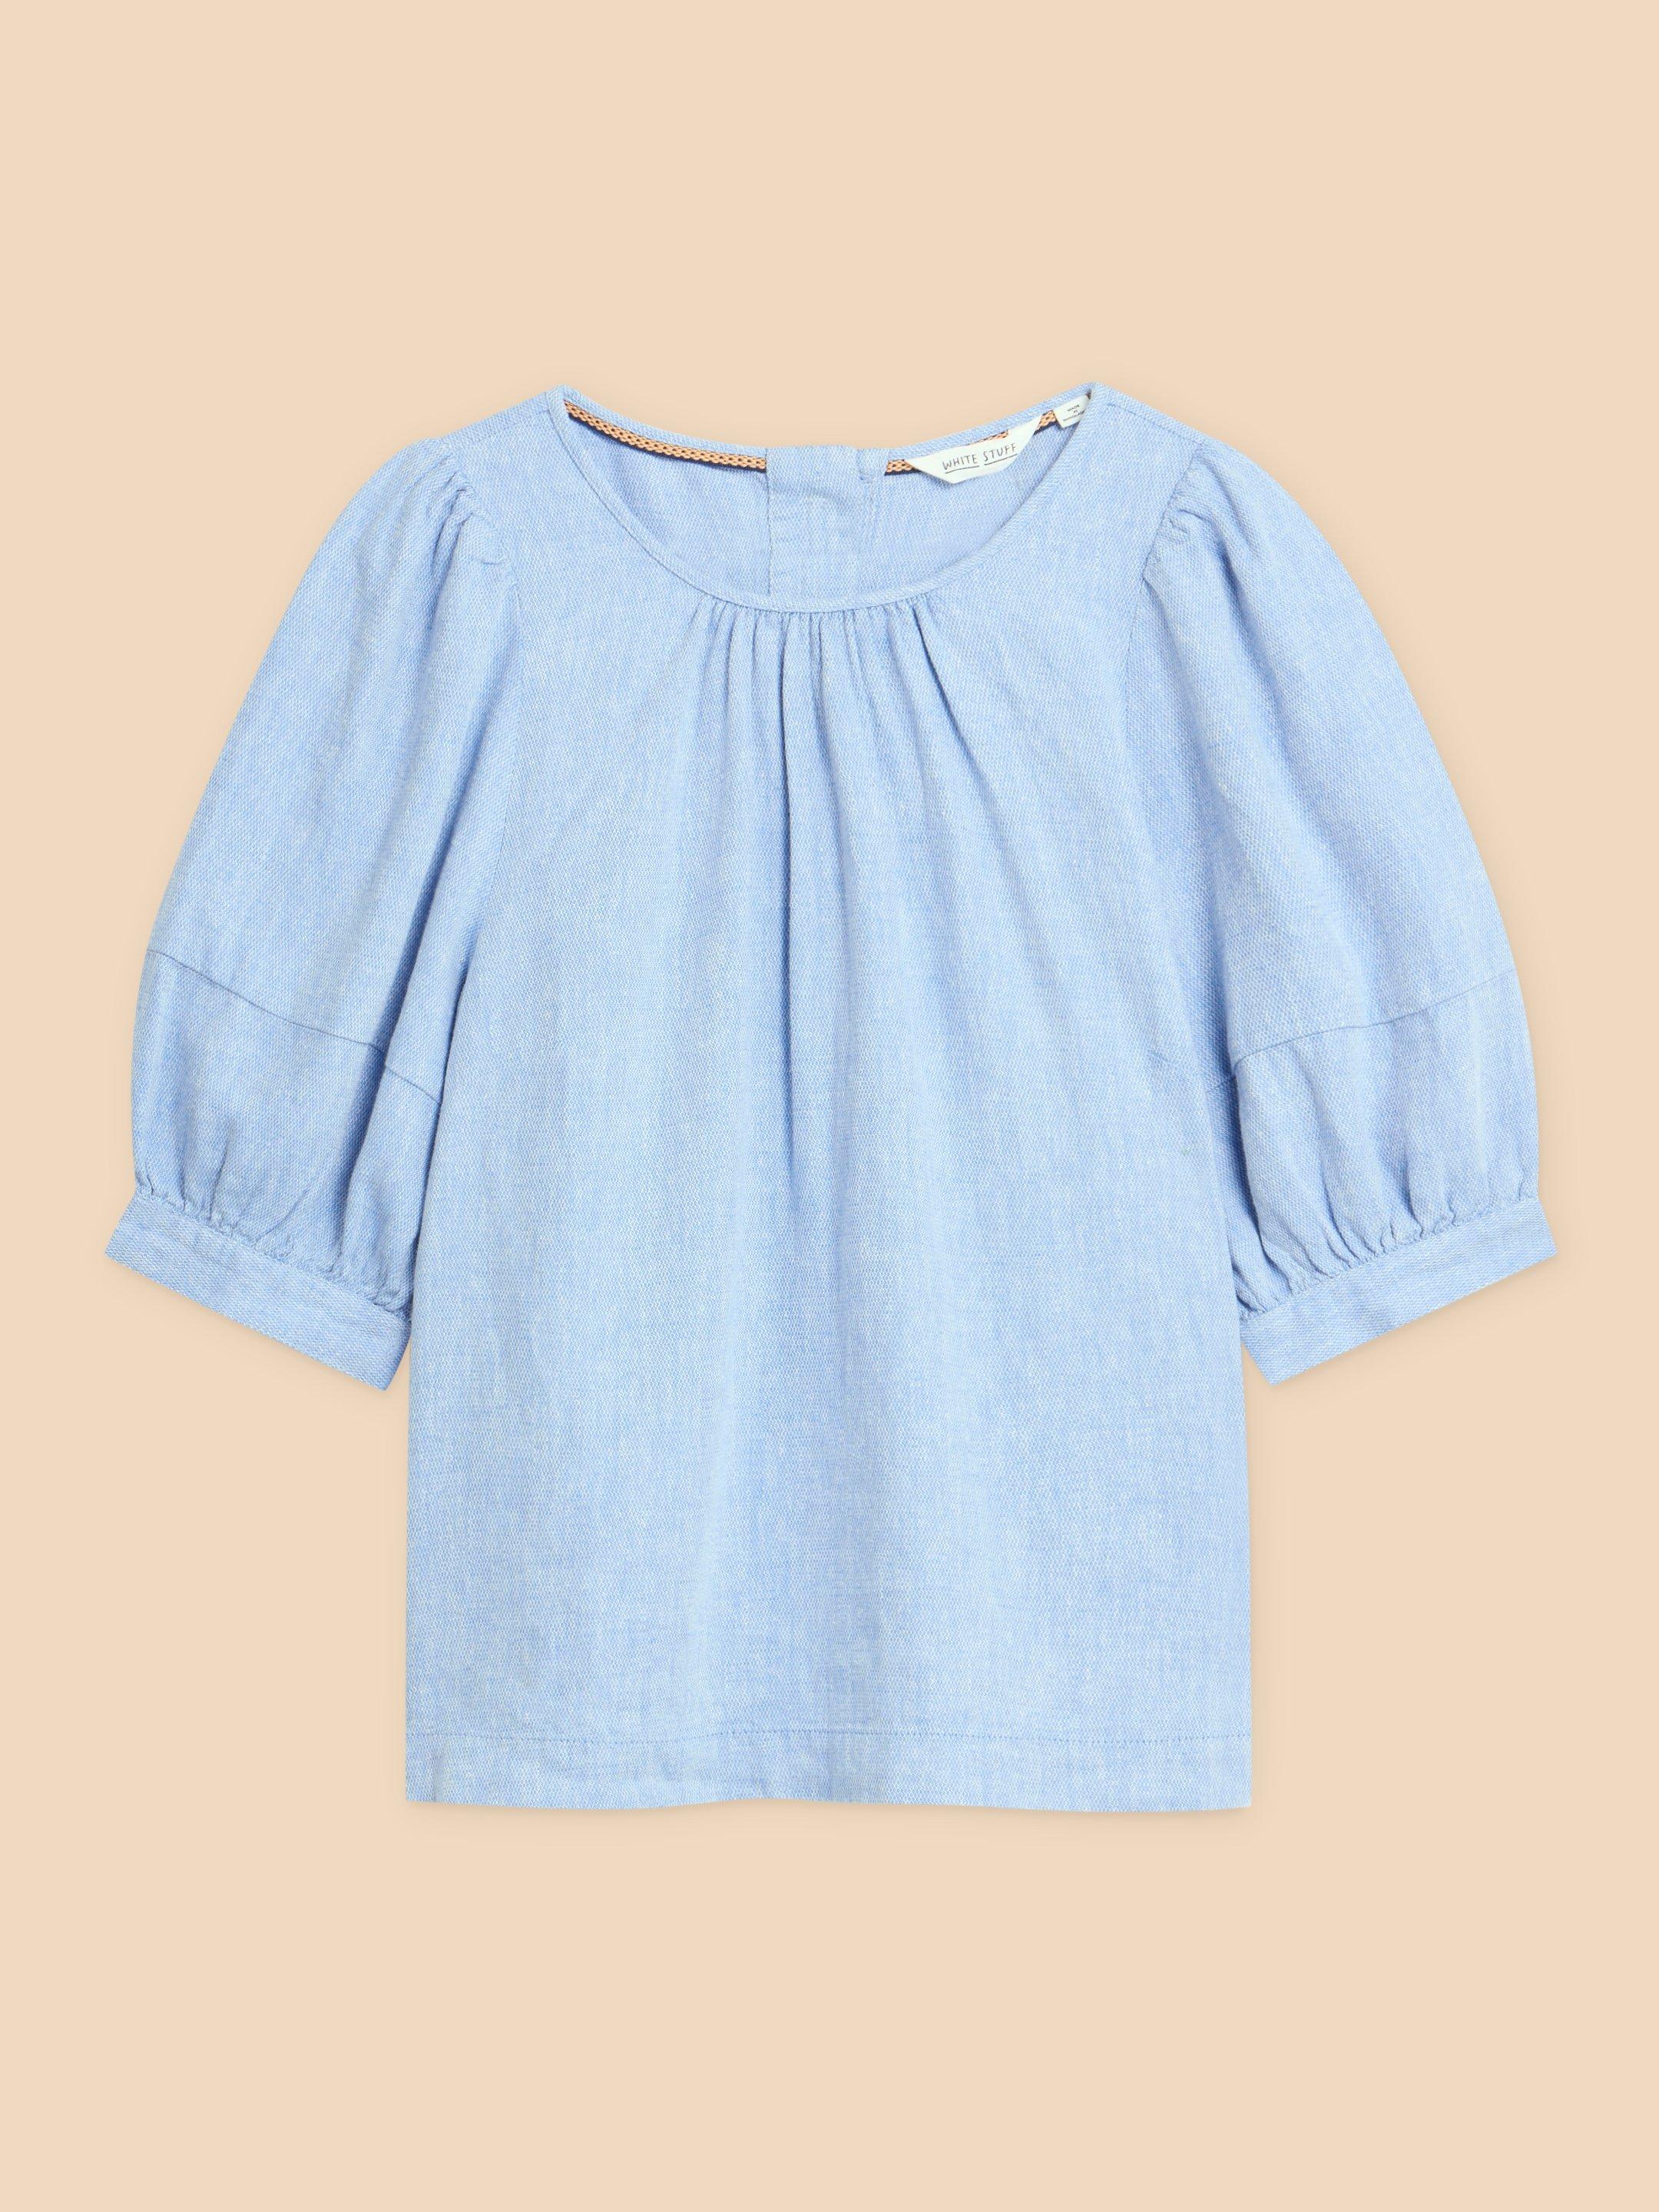 Shelly Linen Blend Top in CHAMB BLUE - FLAT FRONT